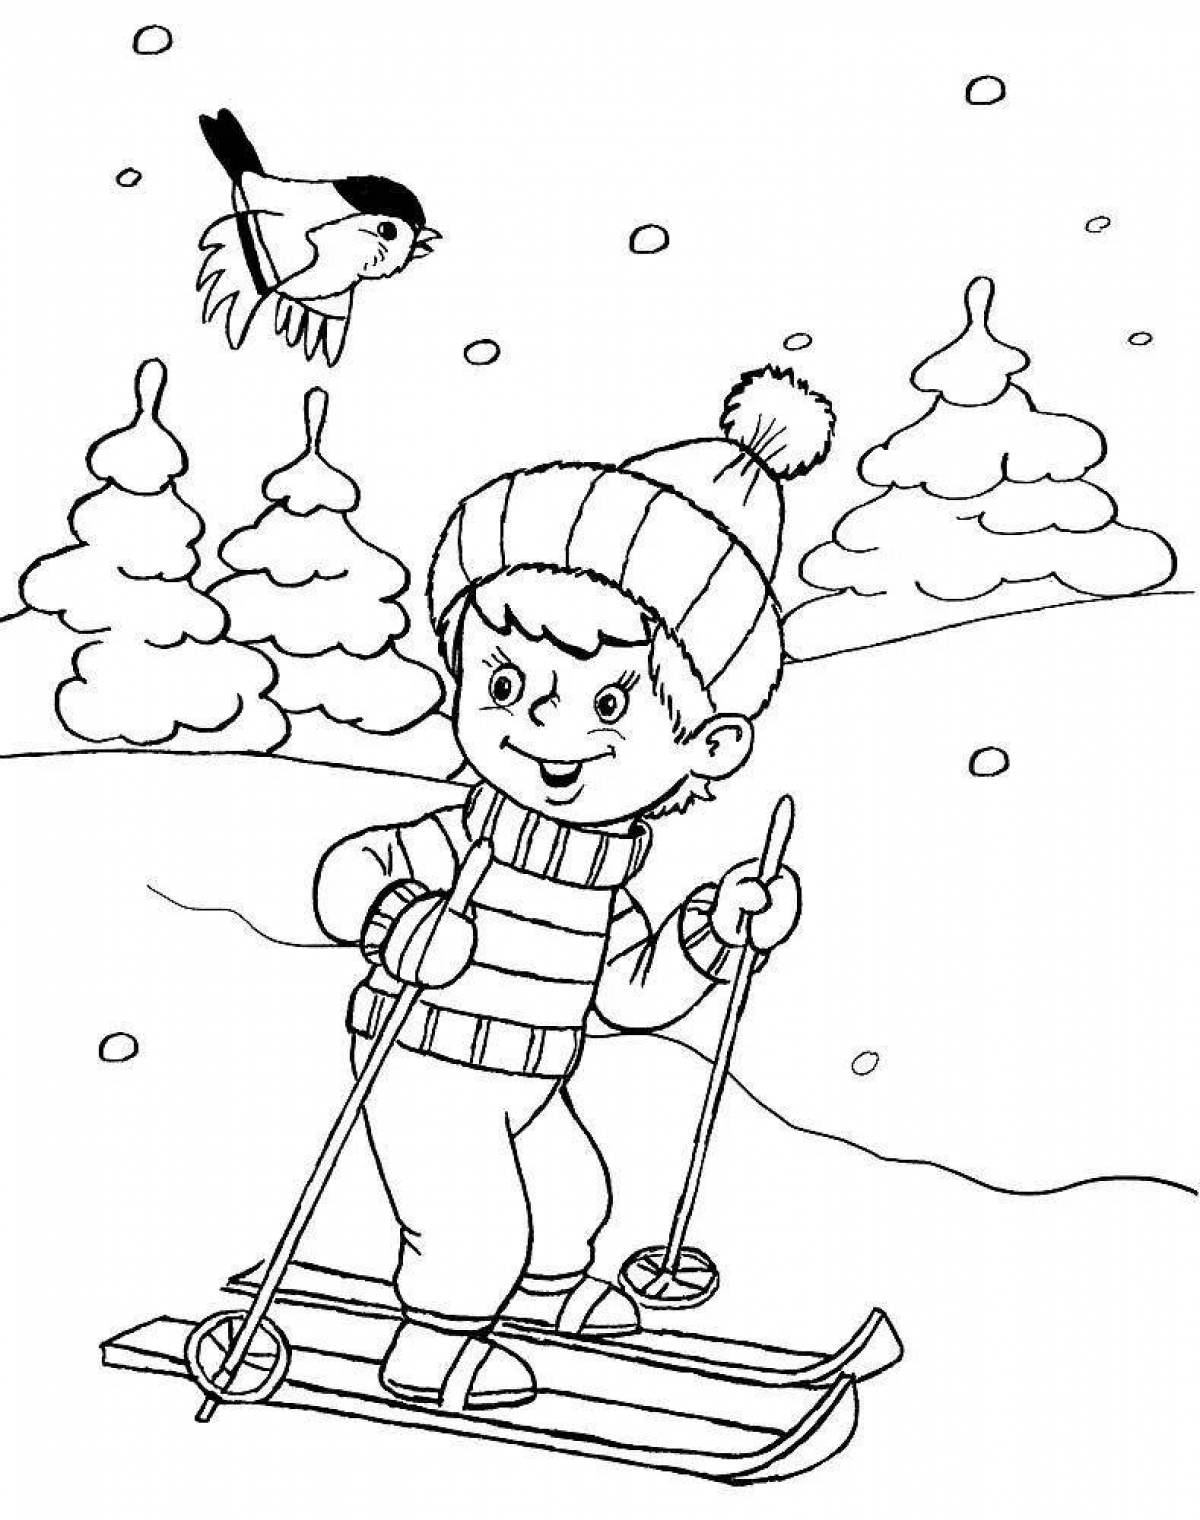 Coloring book energetic skier for children 6-7 years old